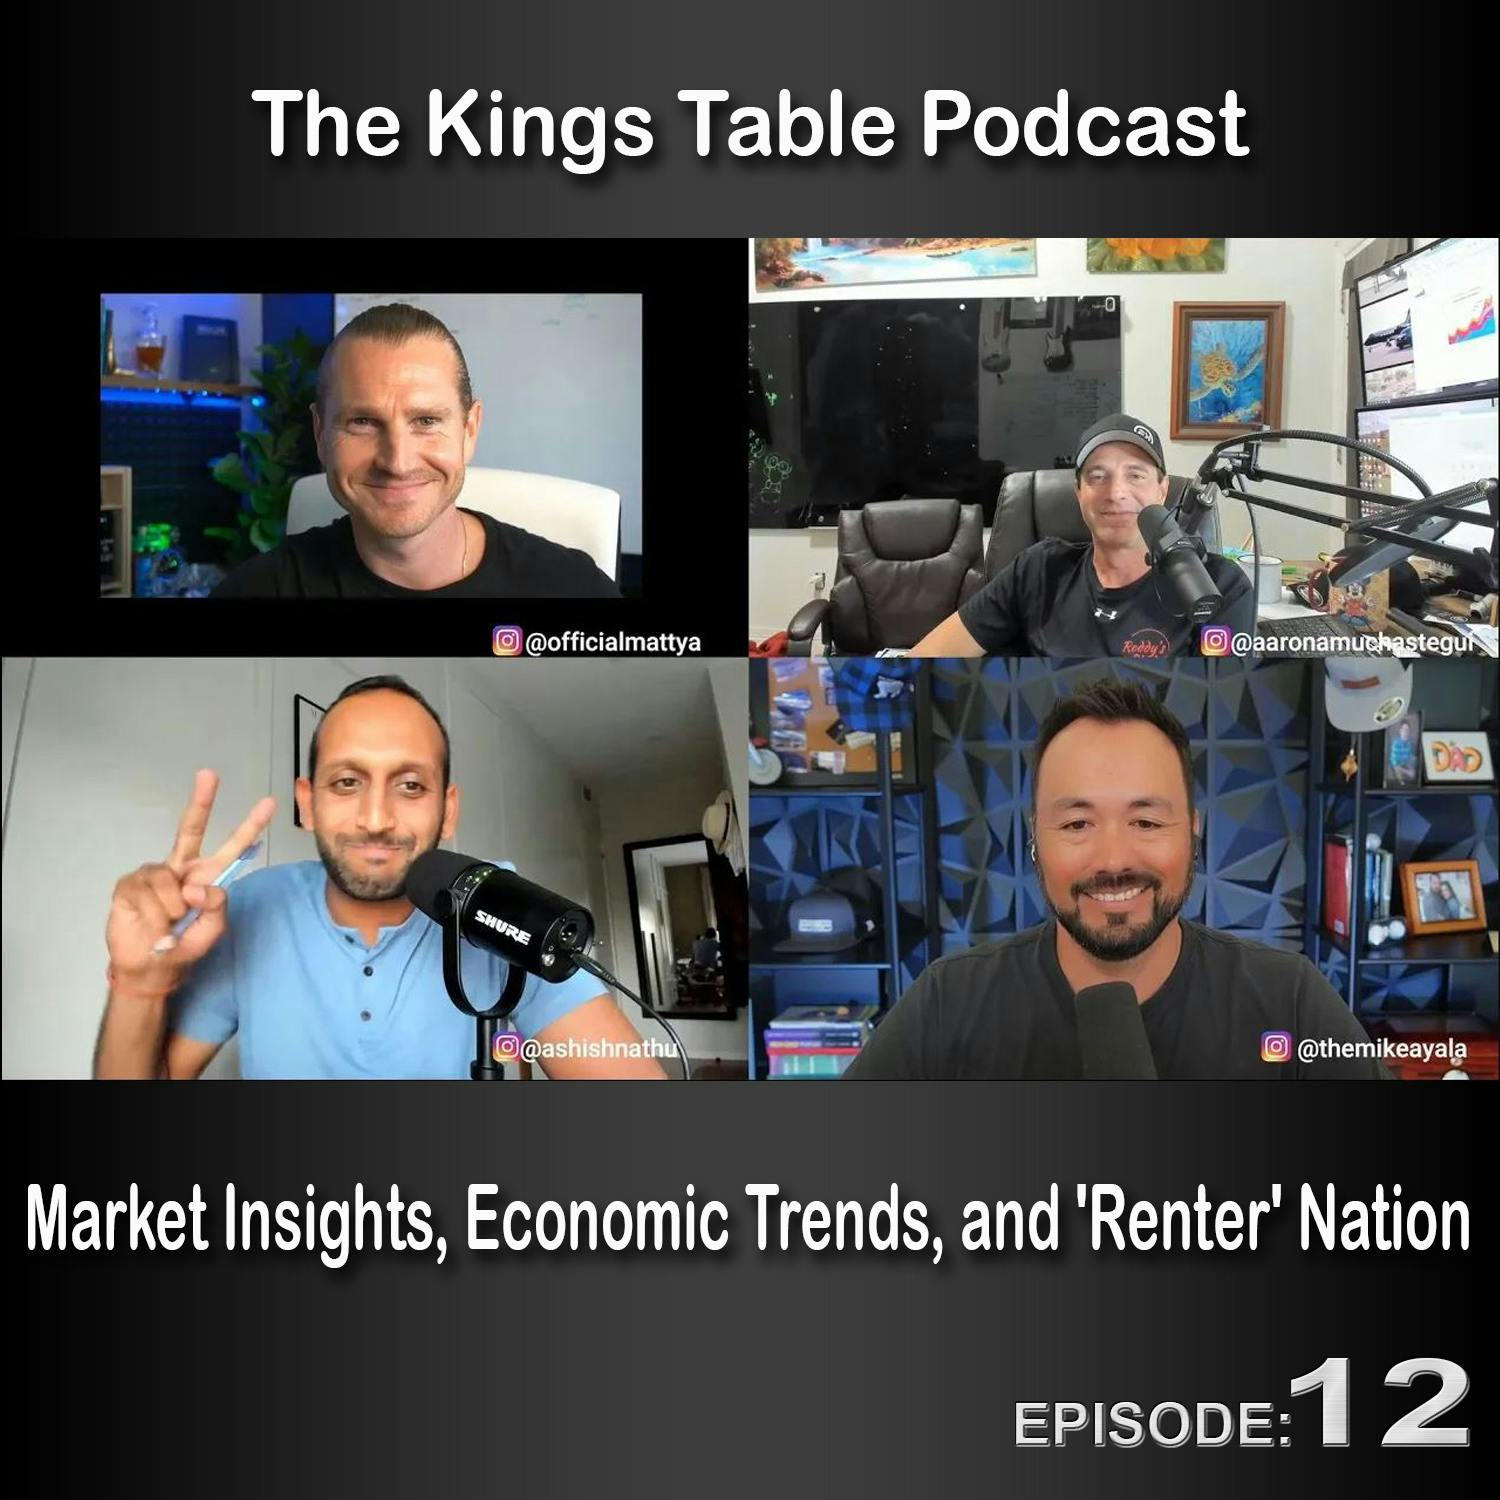 The Kings Table Episode 12 - Market Insights, Economic Trends, and ’Renter’ Nation